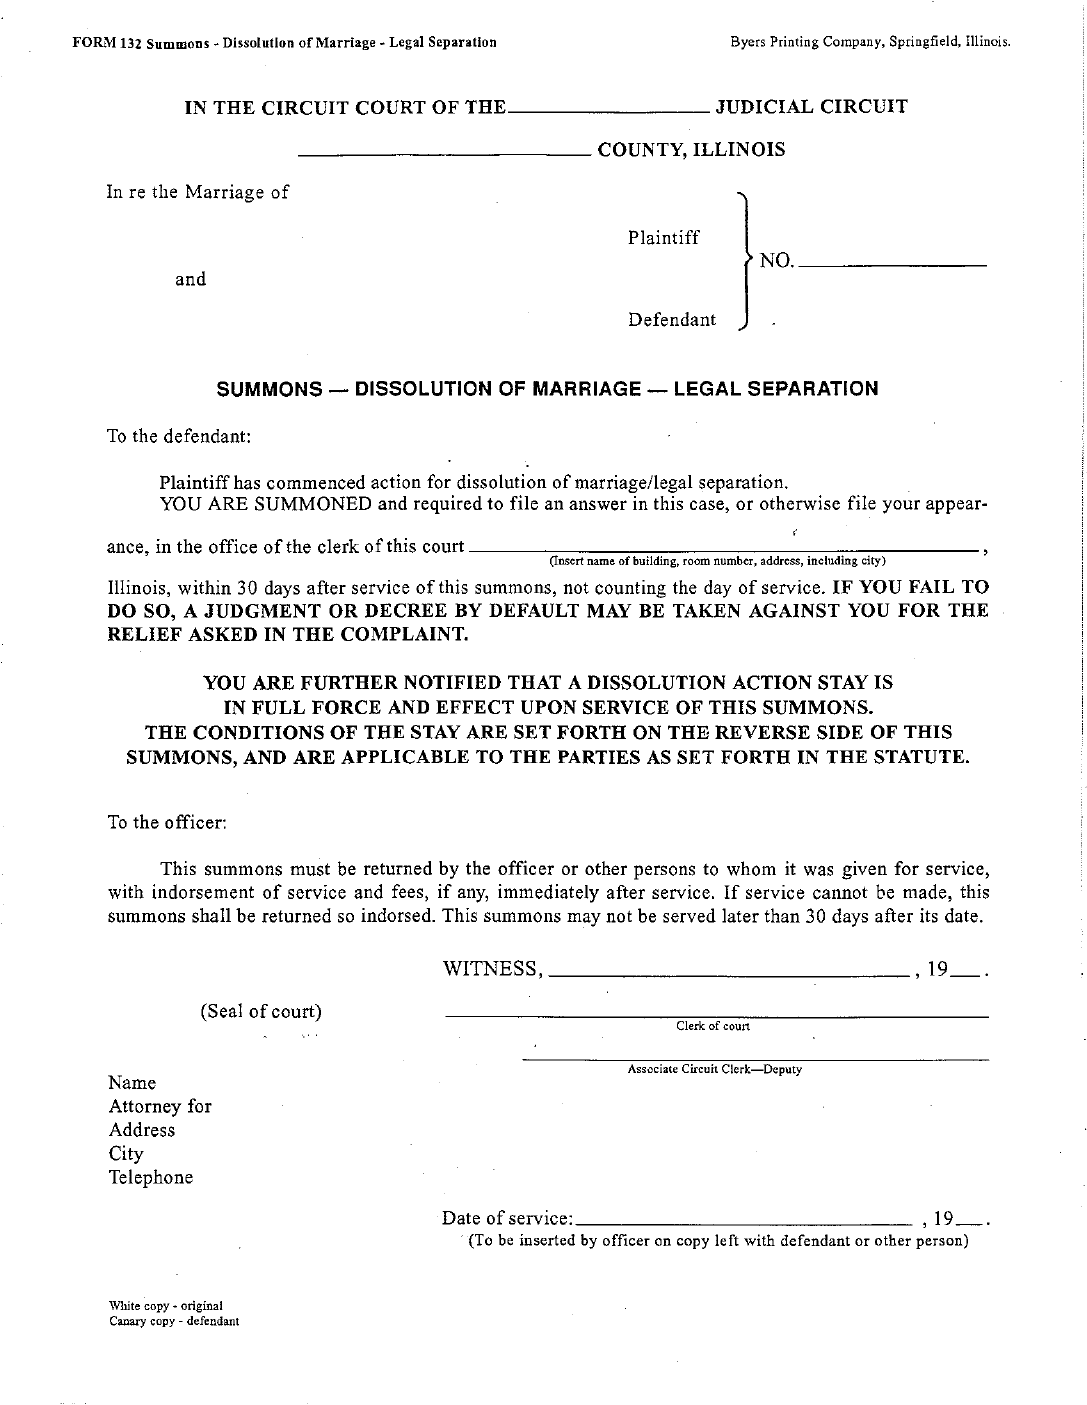 Dissolution Of Marriage Form Without Minor Children Illinois Edit 